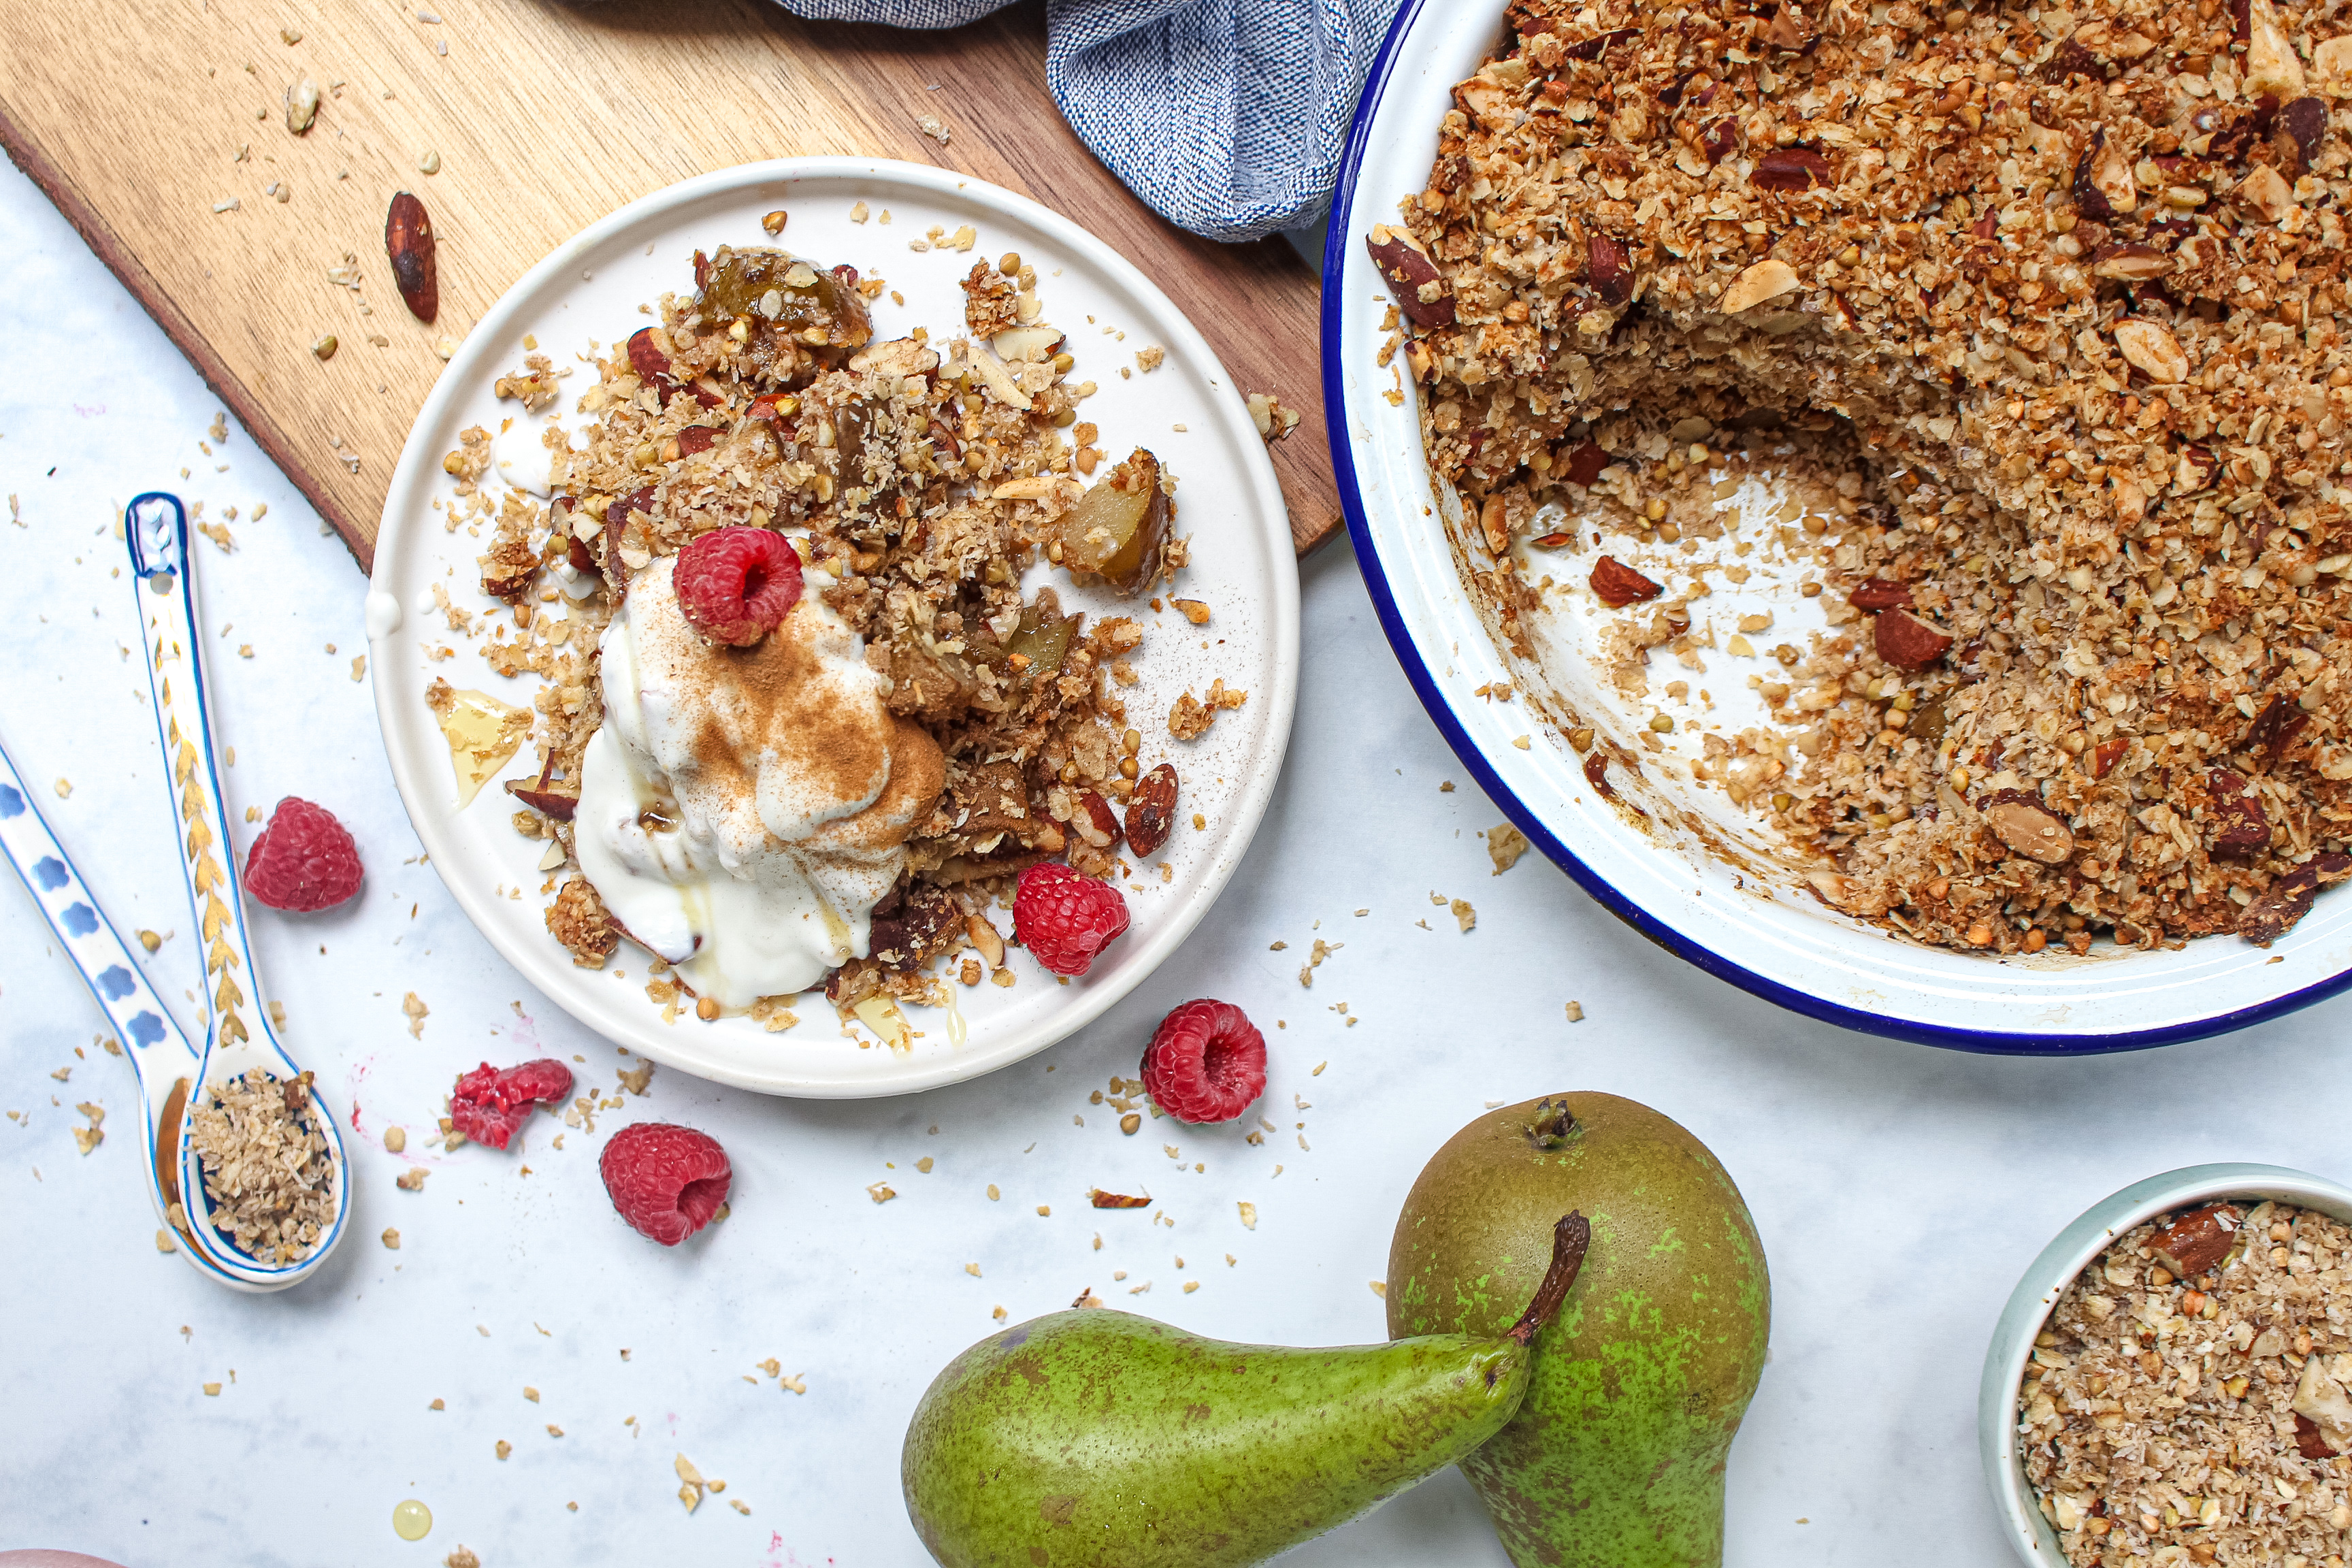 Pear, Cardamom and Almond Crumble